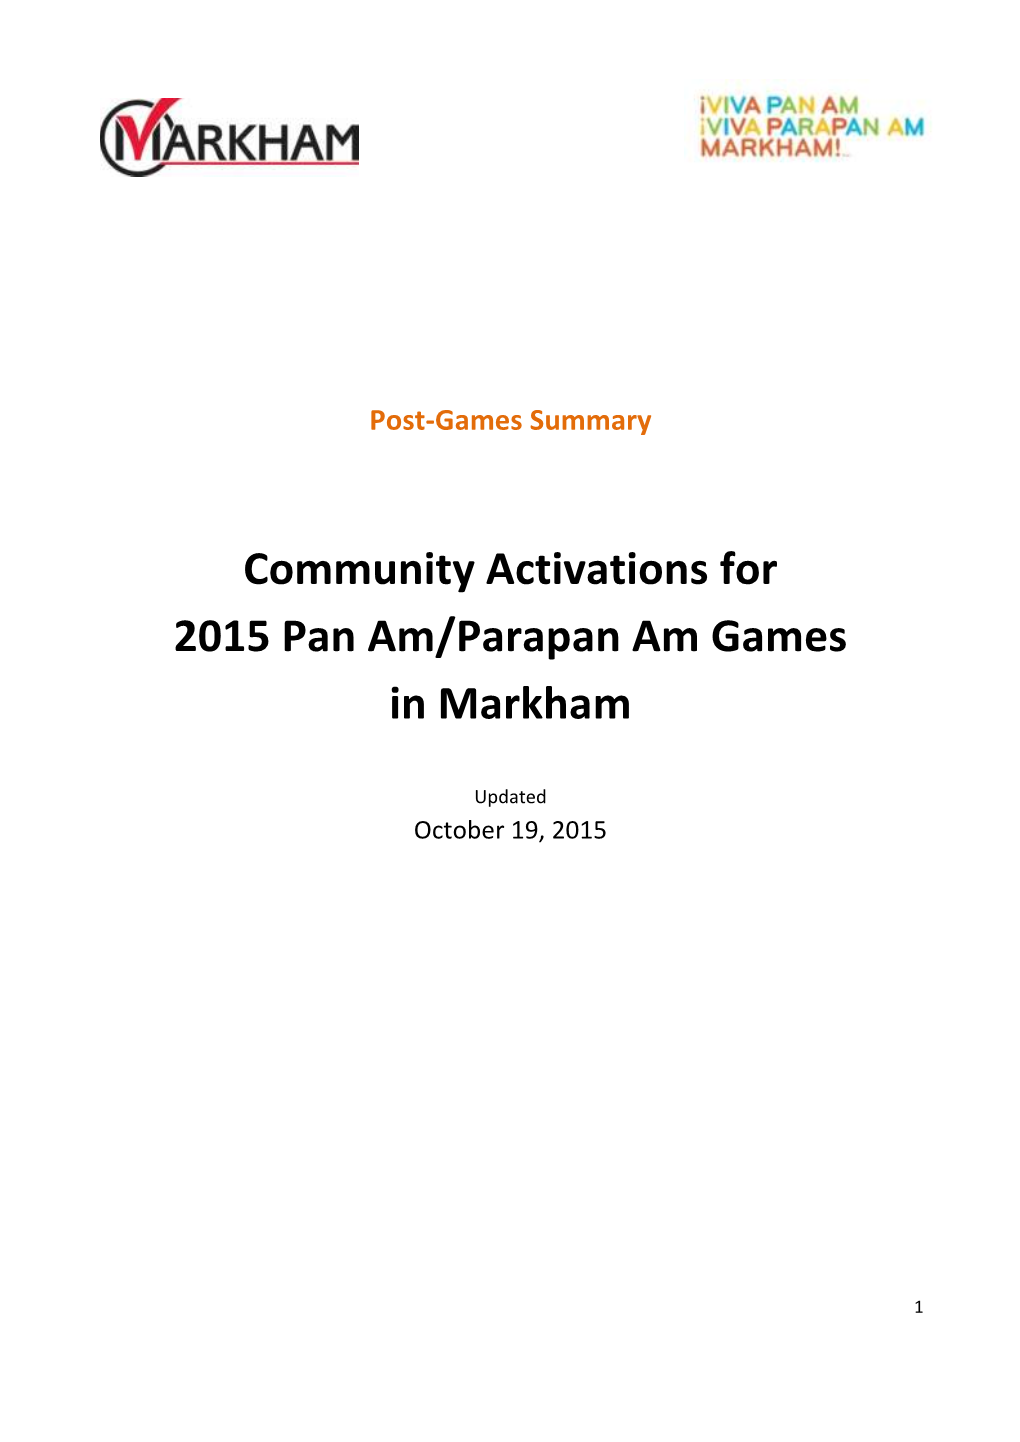 Community Activations for 2015 Pan Am/Parapan Am Games in Markham